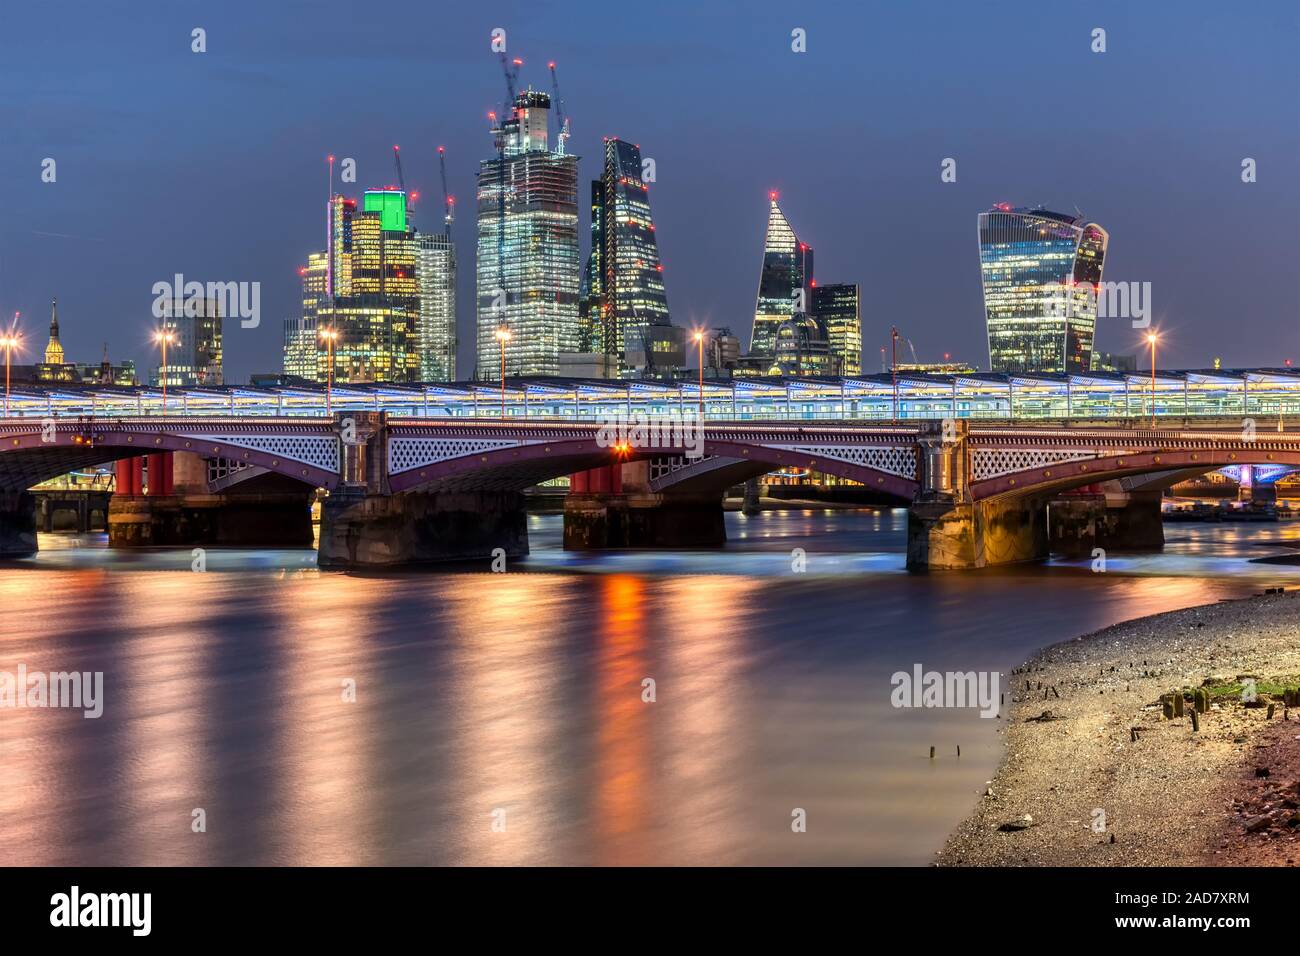 Blackfriars Bridge and the skyscrapers of the City of London at night Stock Photo